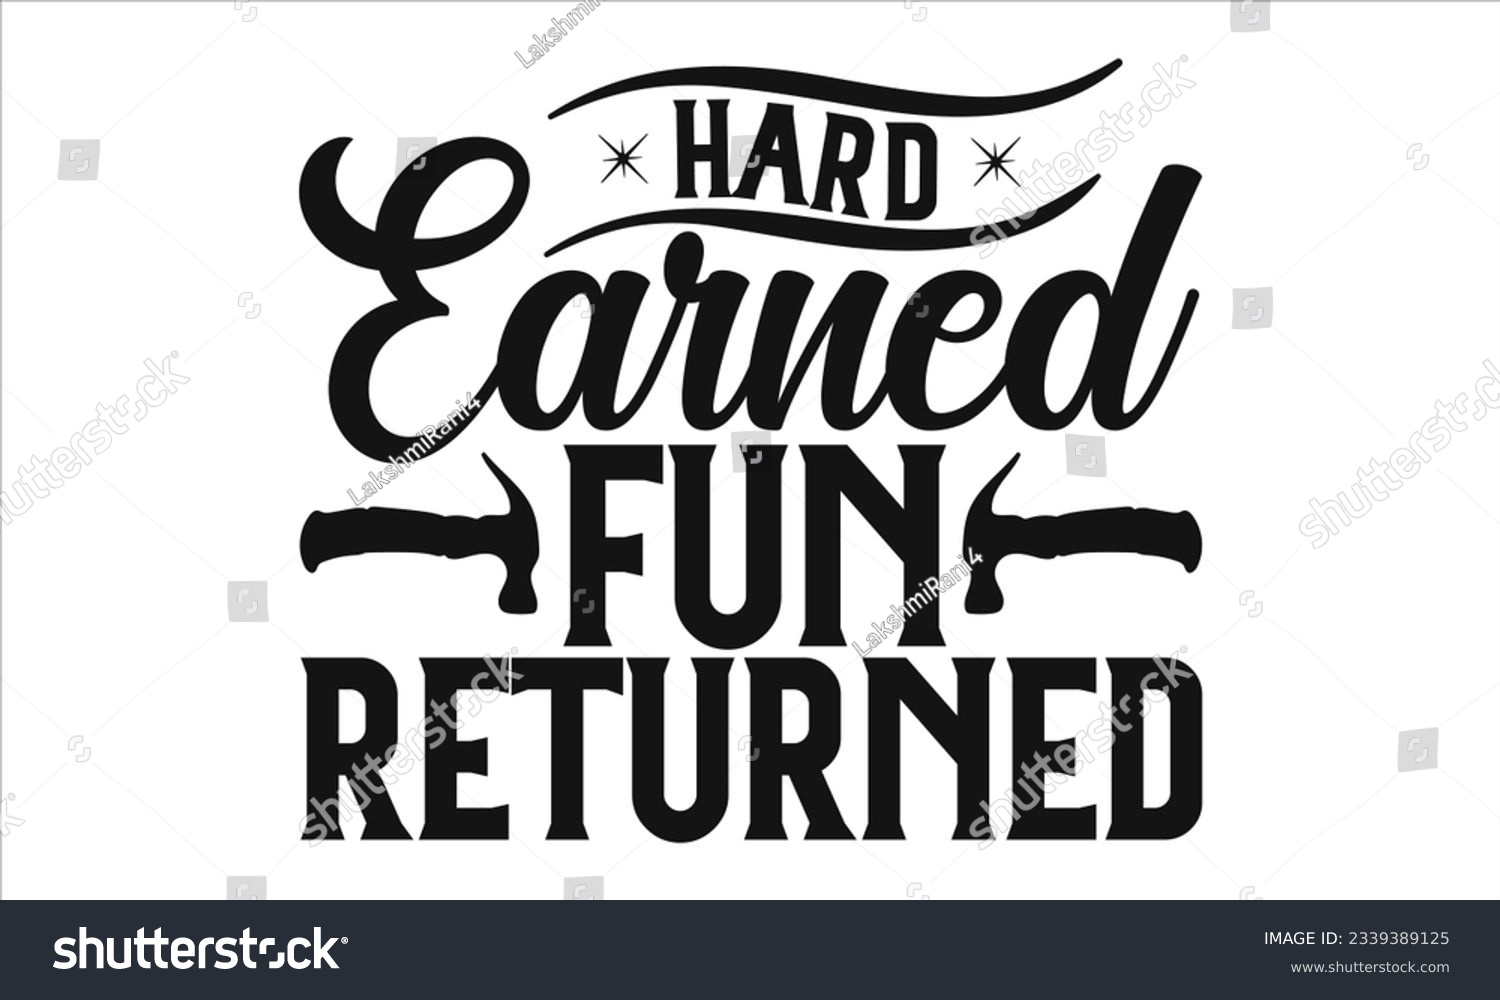 SVG of Hard Earned Fun Returned -  Lettering design for greeting banners, Mouse Pads, Prints, Cards and Posters, Mugs, Notebooks, Floor Pillows and T-shirt prints design.
 svg